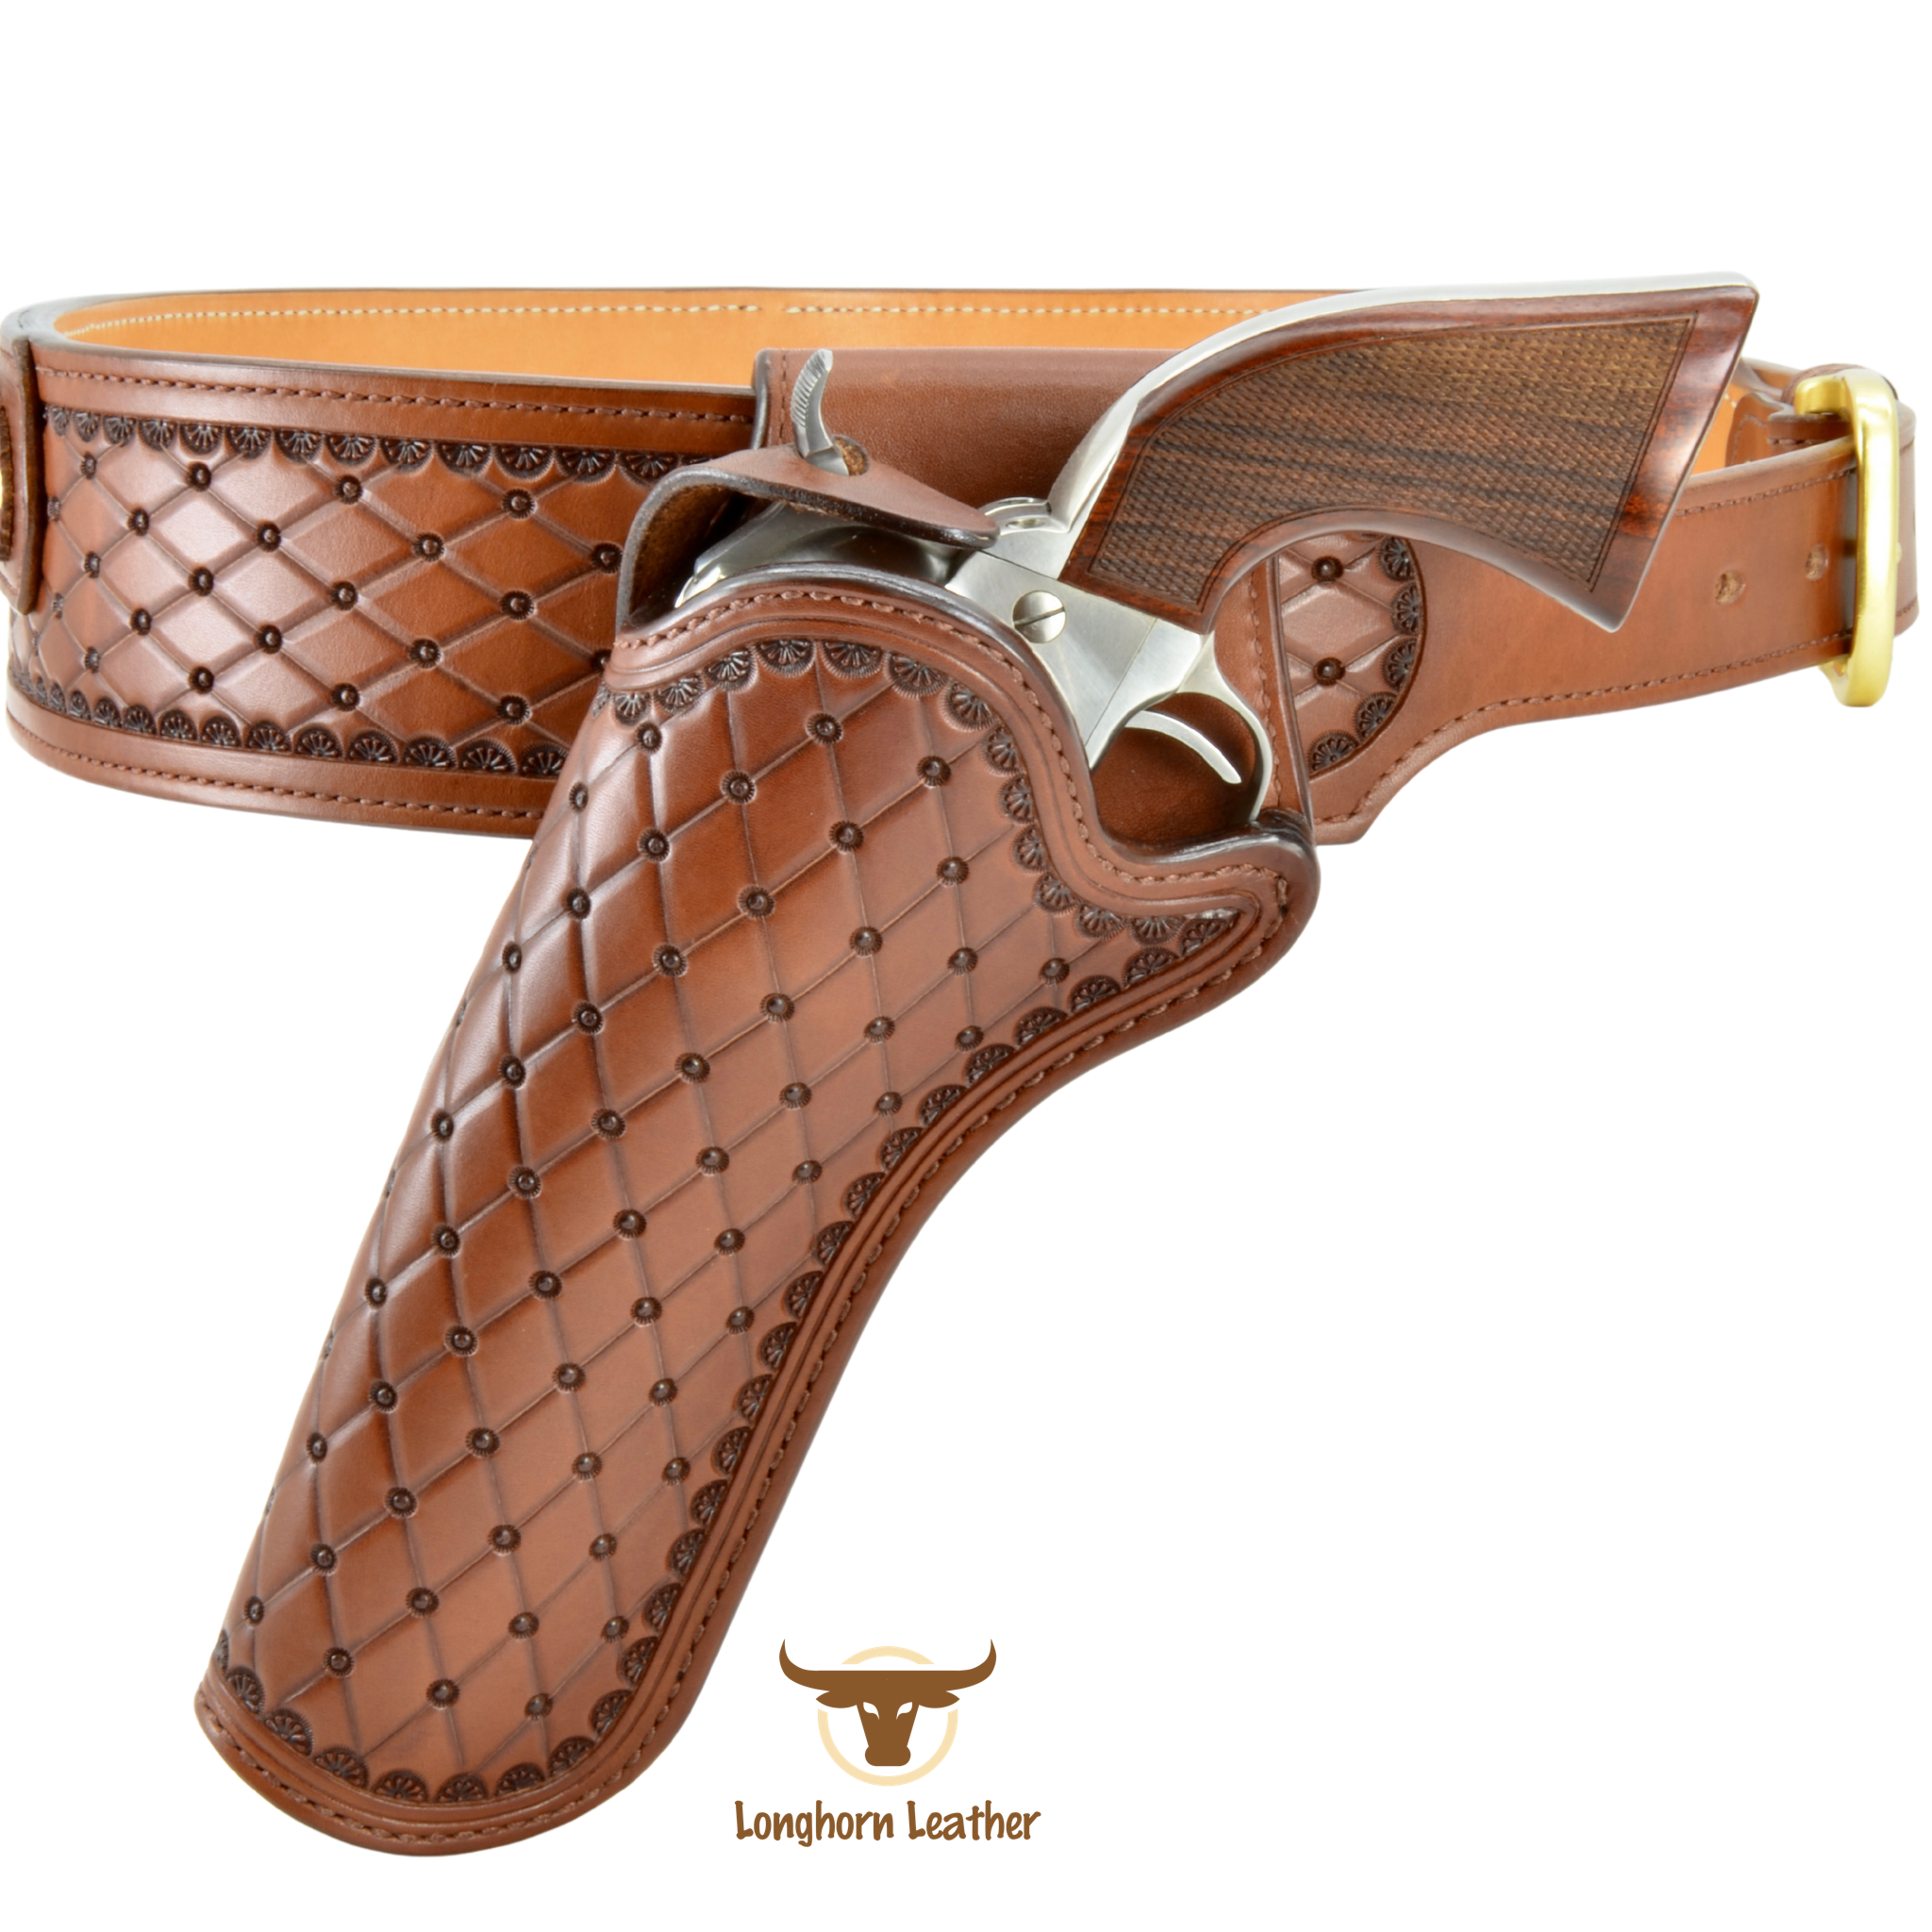 Custom leather single action cross draw holster and cartridge belt featuring the “San Carlos” design.  Individually handcrafted at Longhorn Leather AZ